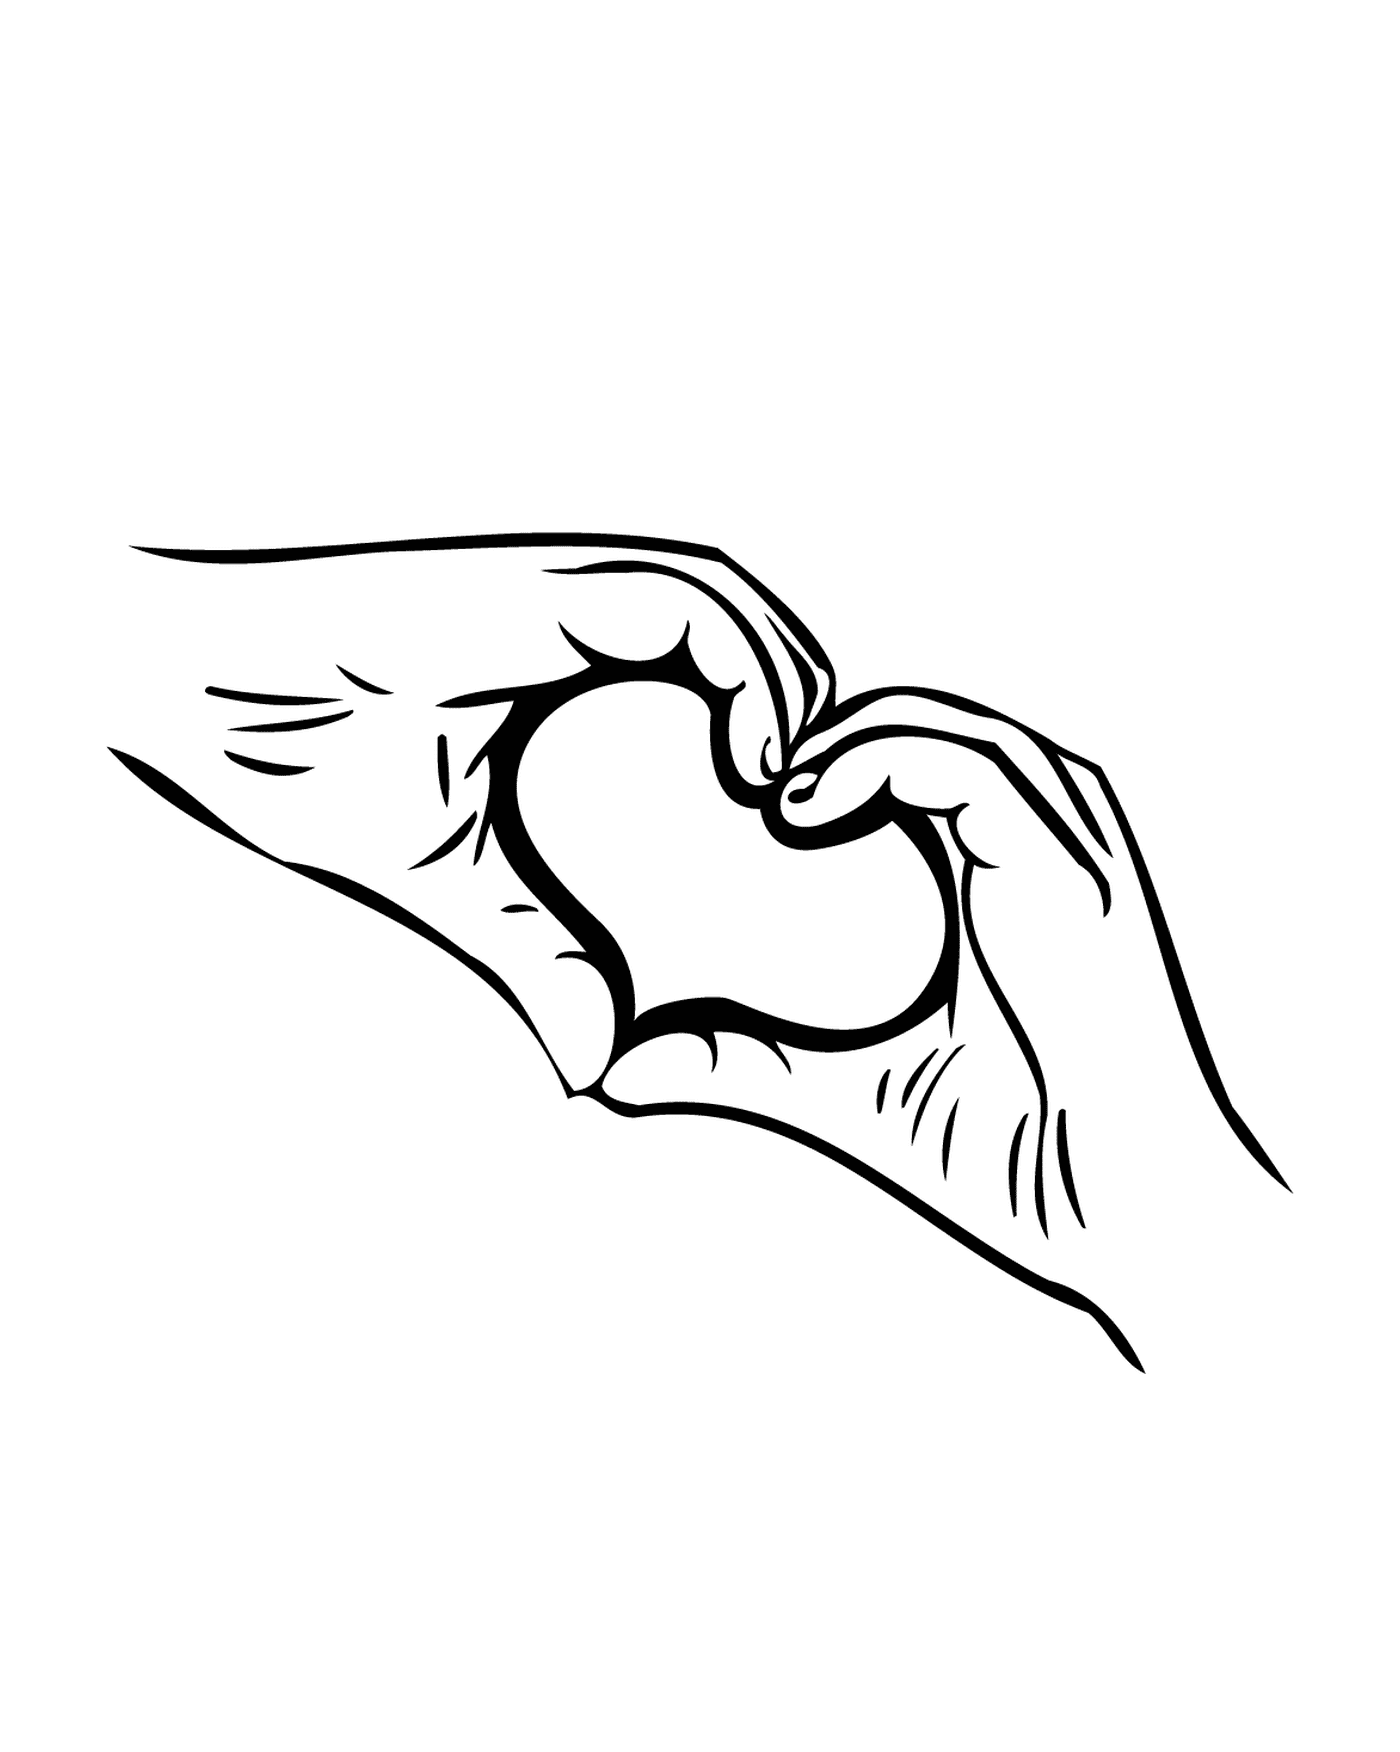  Two hands forming a sincere heart 